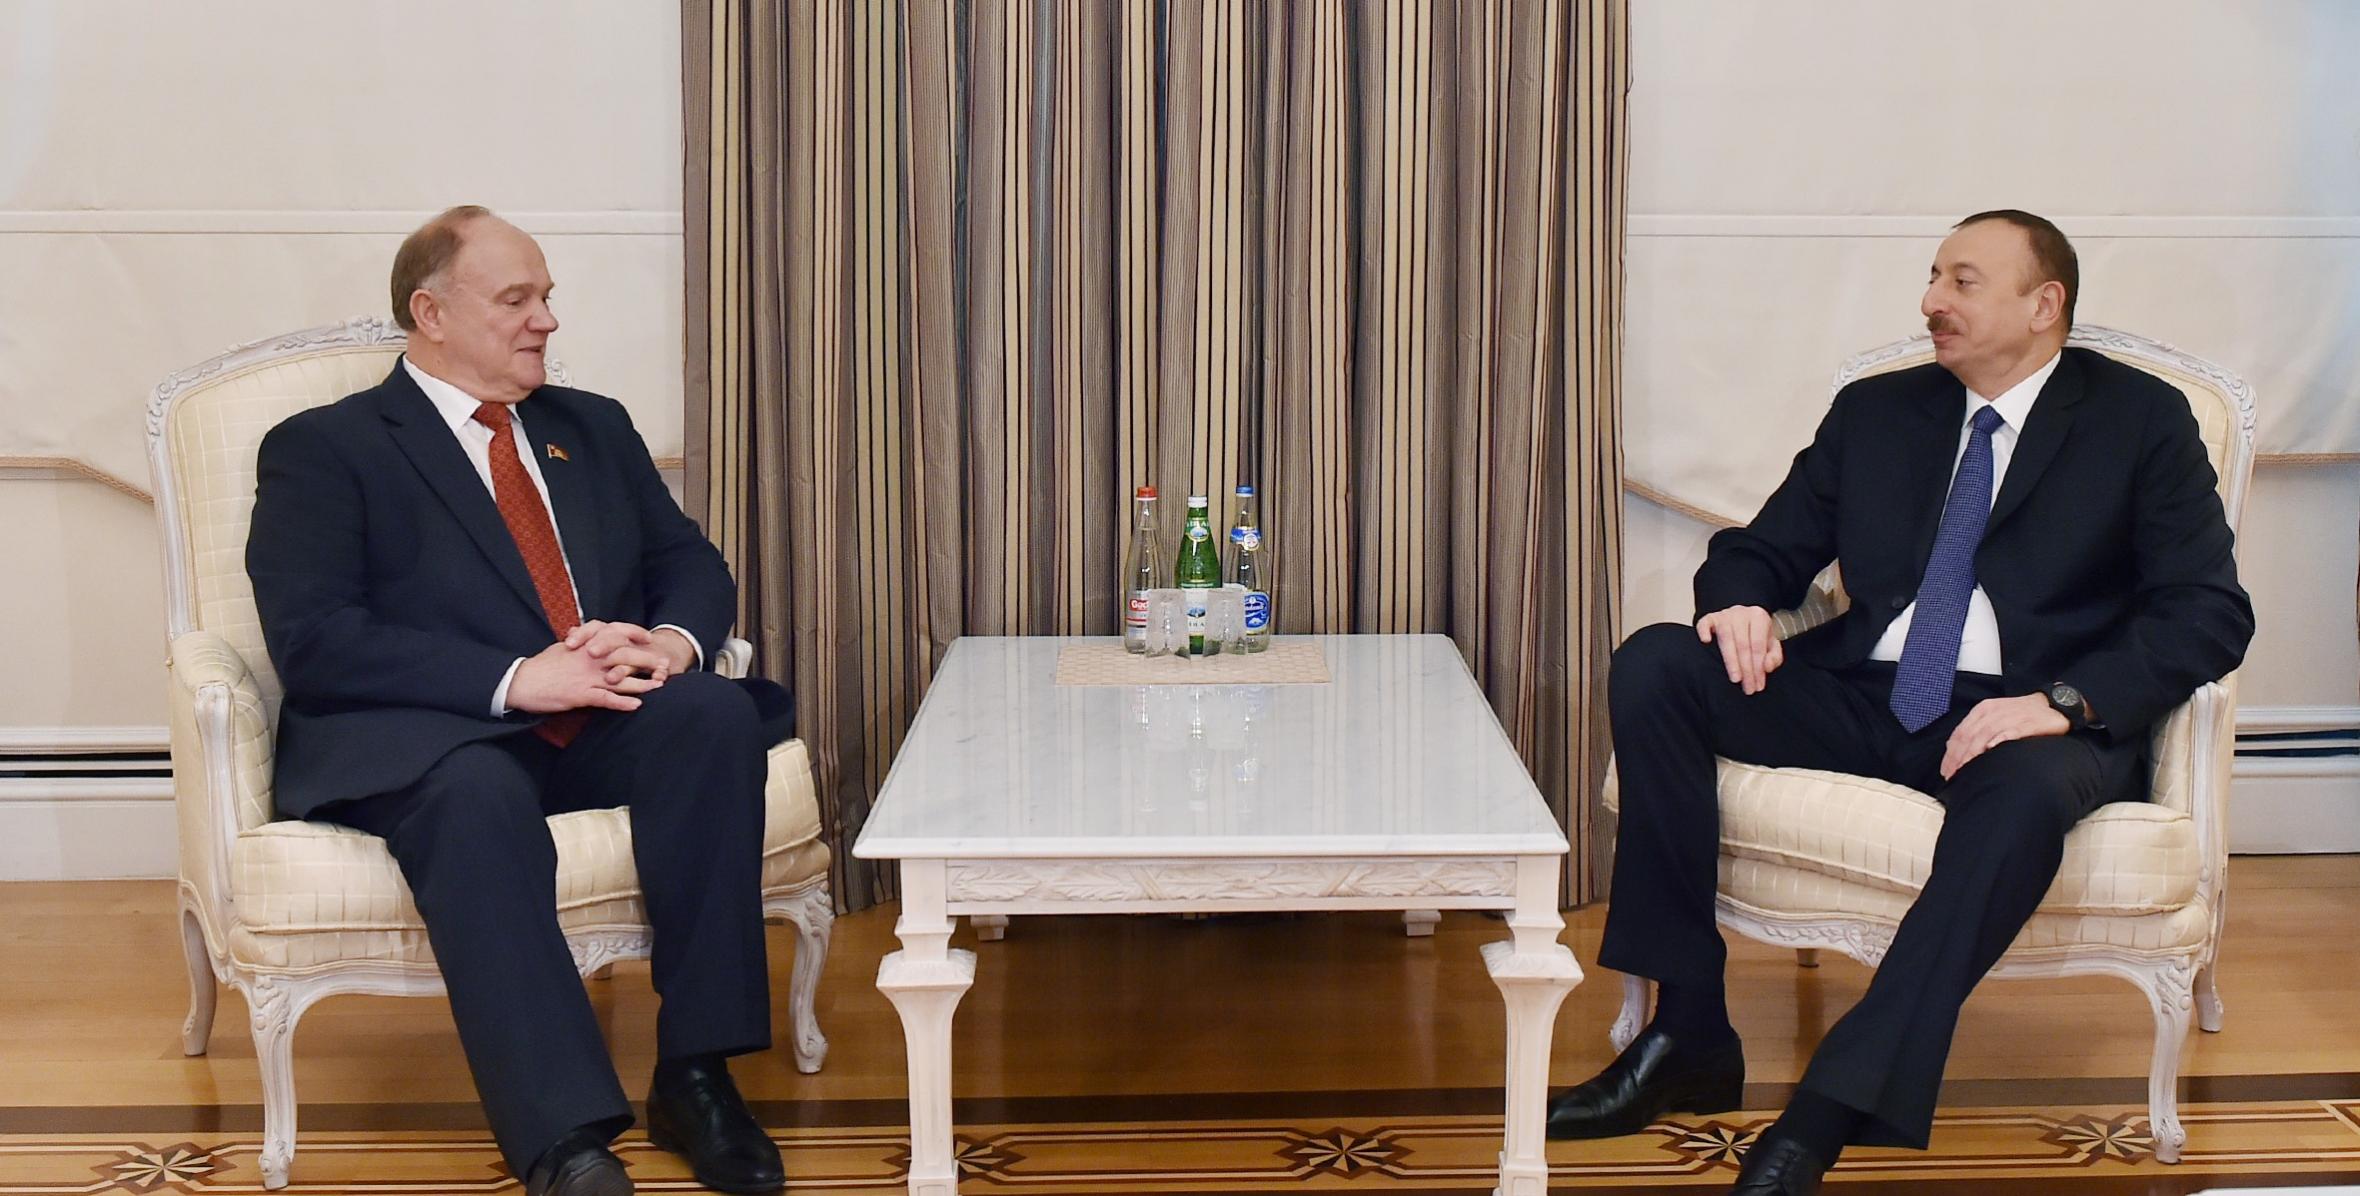 Ilham Aliyev received a delegation led by the chairman of the Communist Party faction in the State Duma